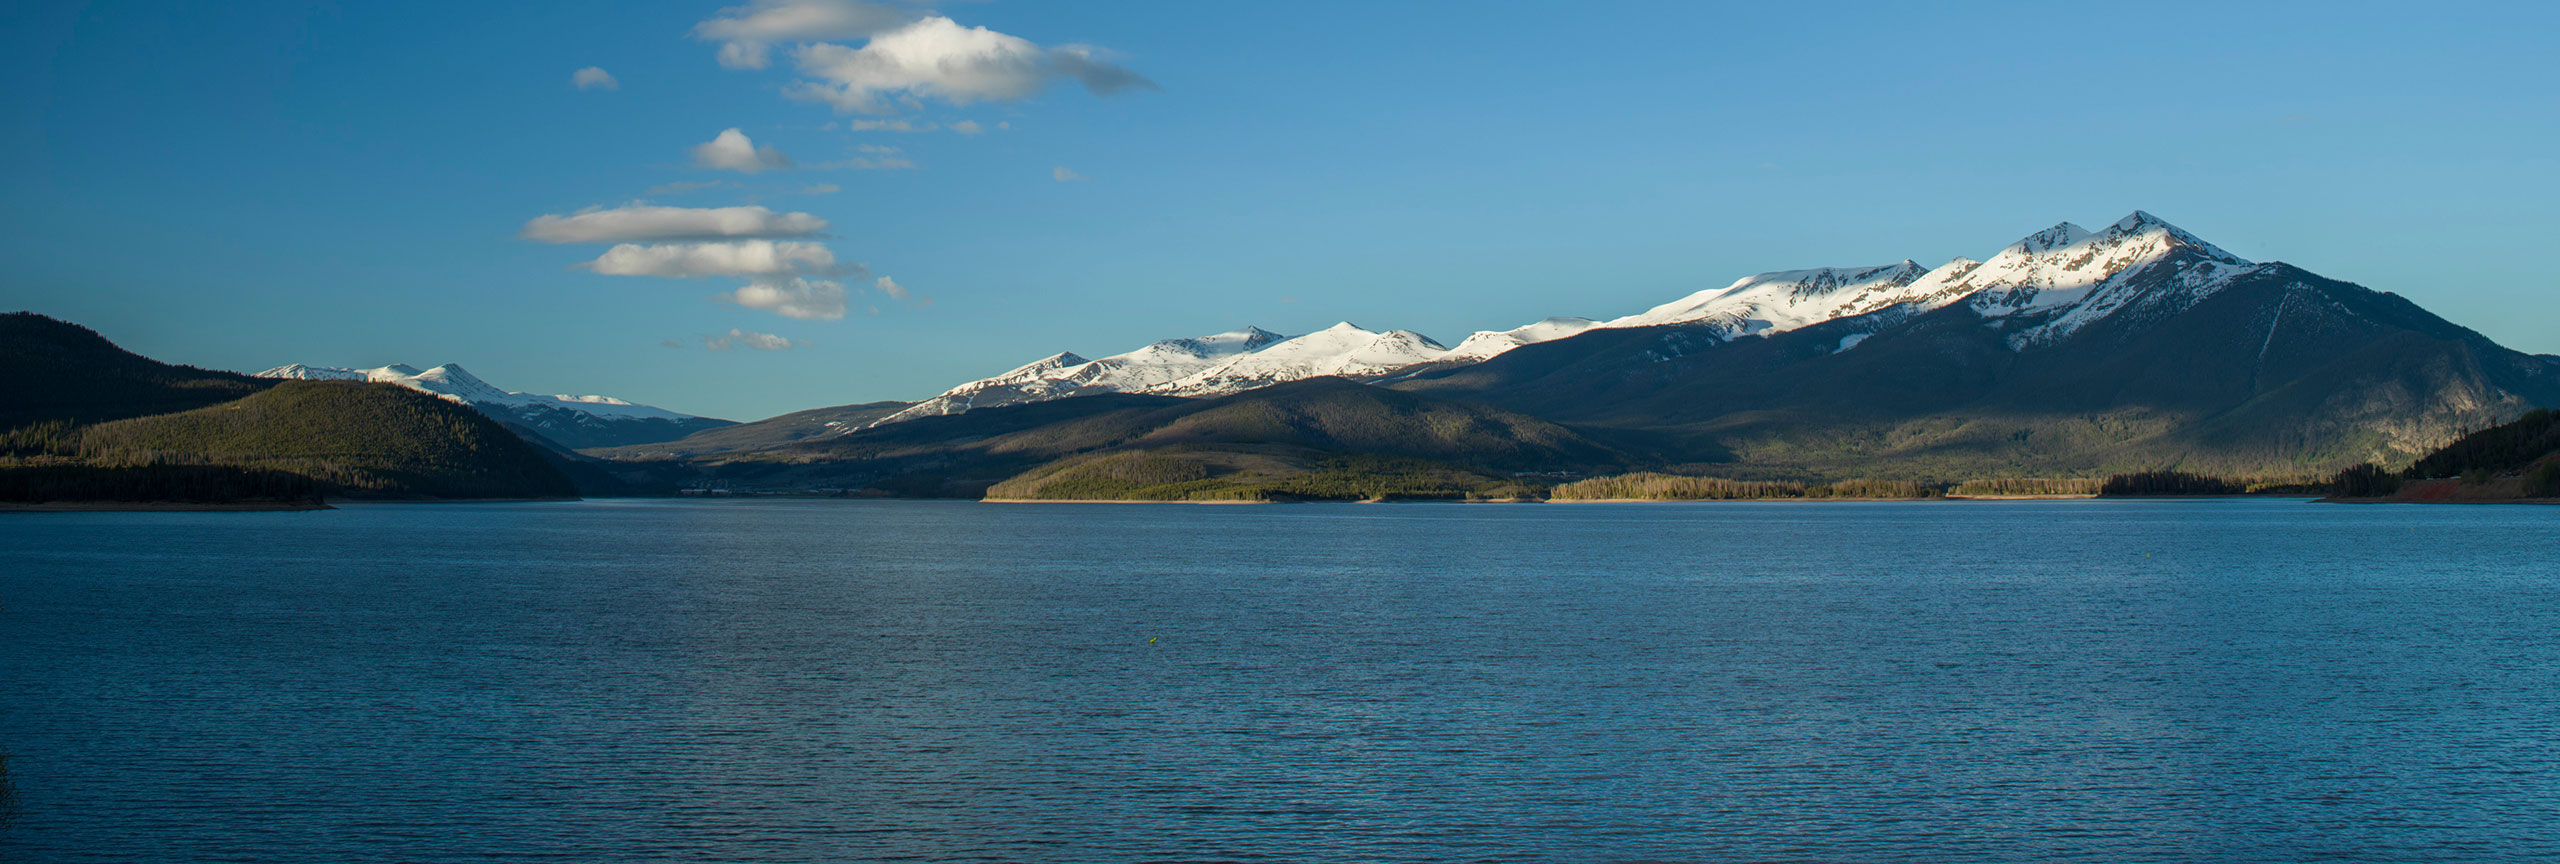 Lake Dillon with Tenmile Range in the background.